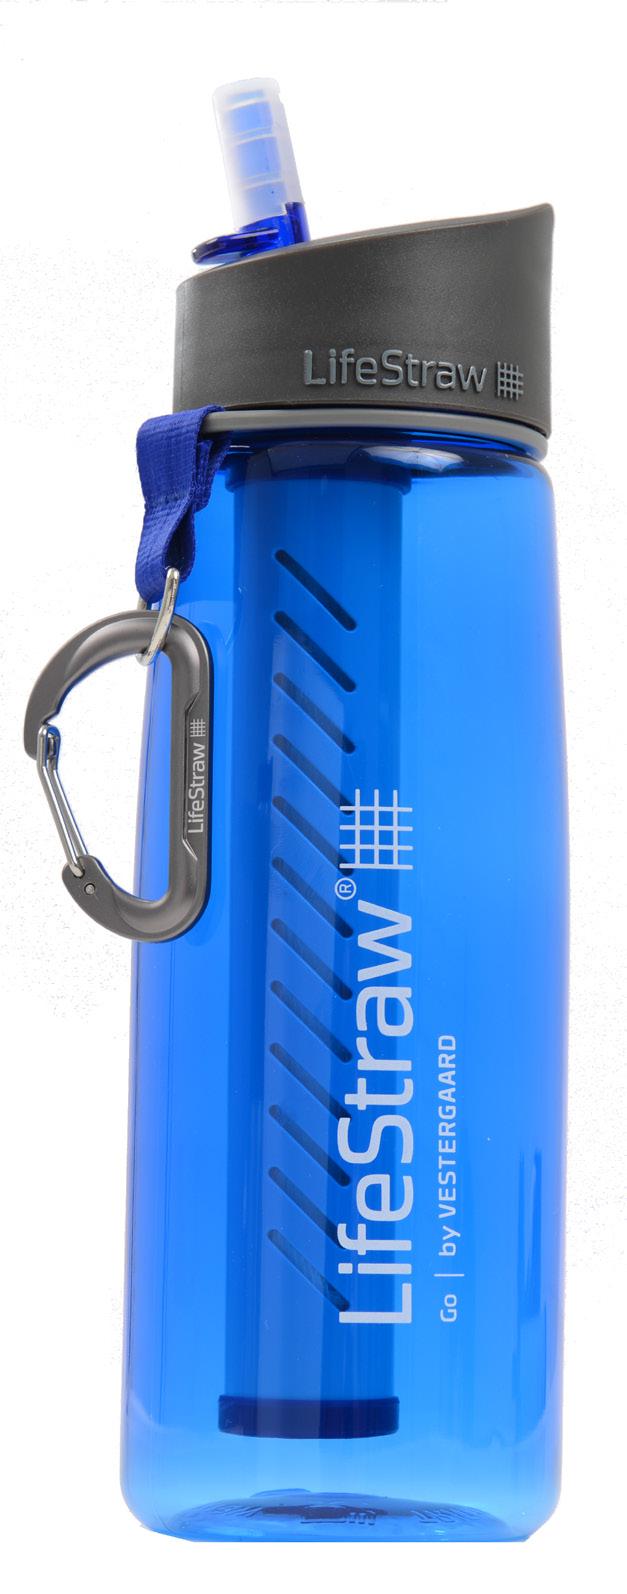 The campaign in October marks the global launch of a new product: LifeStraw Go Portable Water Bottle LifeStraw Go incorporates award-winning LifeStraw technology into a refillable water bottle.